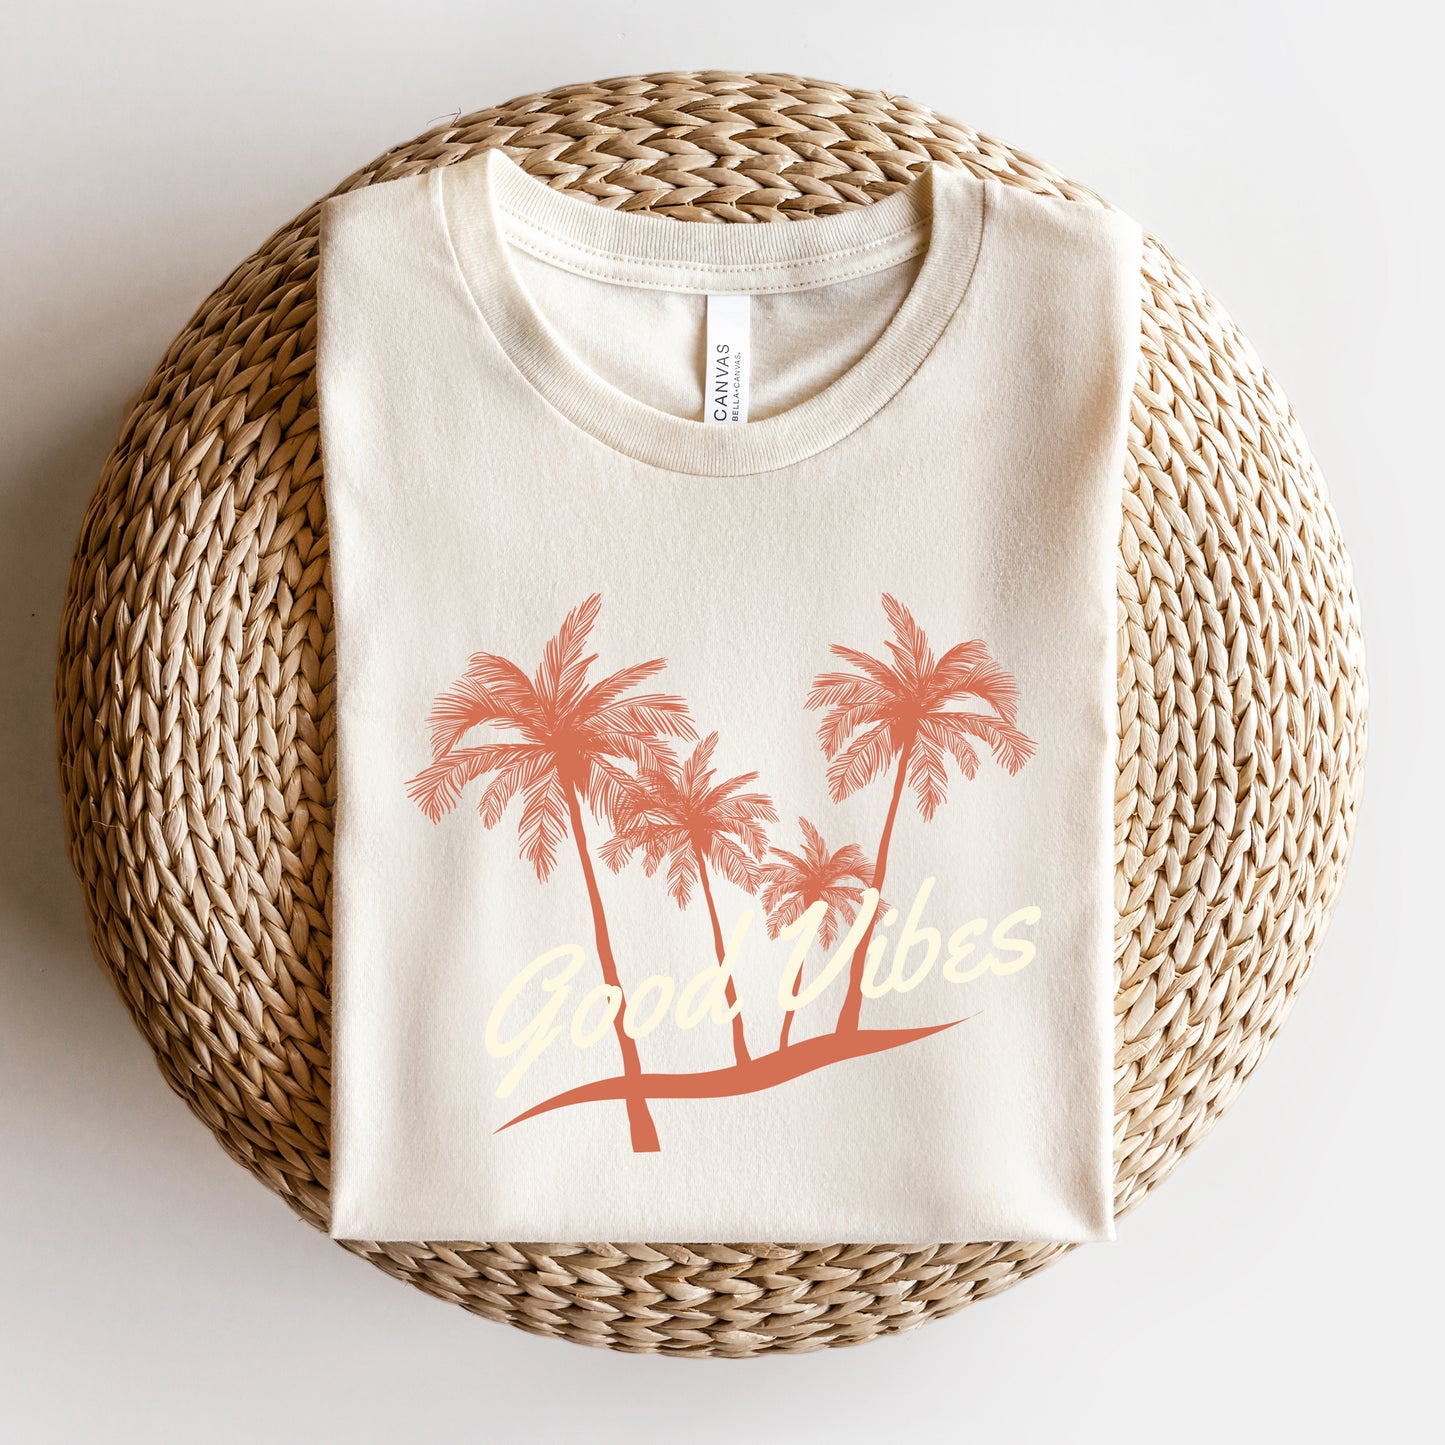 Good Vibes Palm Trees | Short Sleeve Graphic Tee